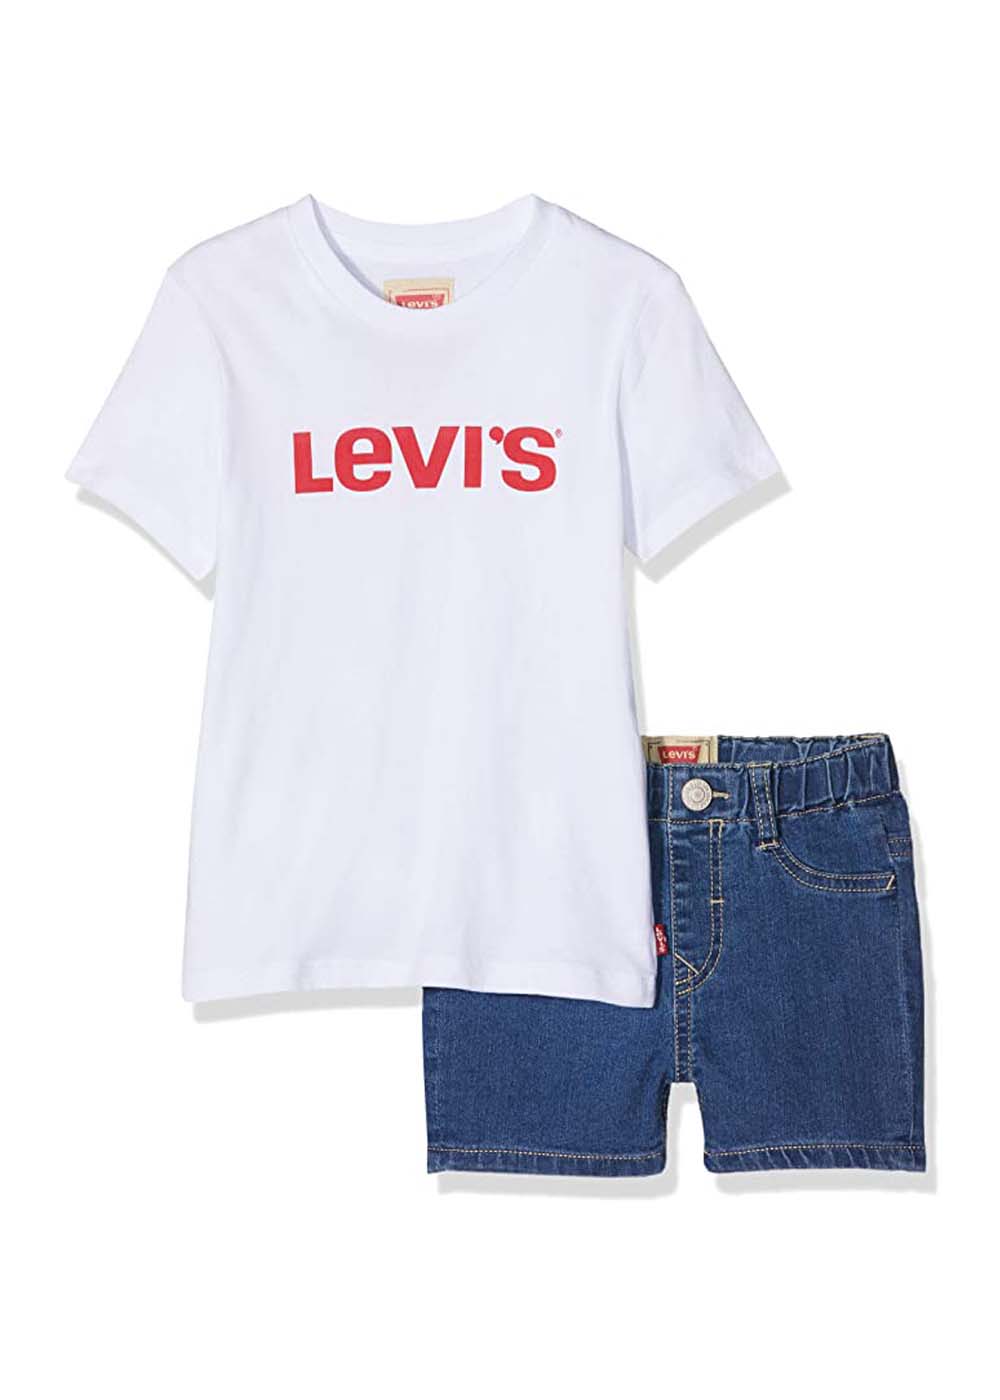 Featured image for “LEVI'S COMPLETINO”